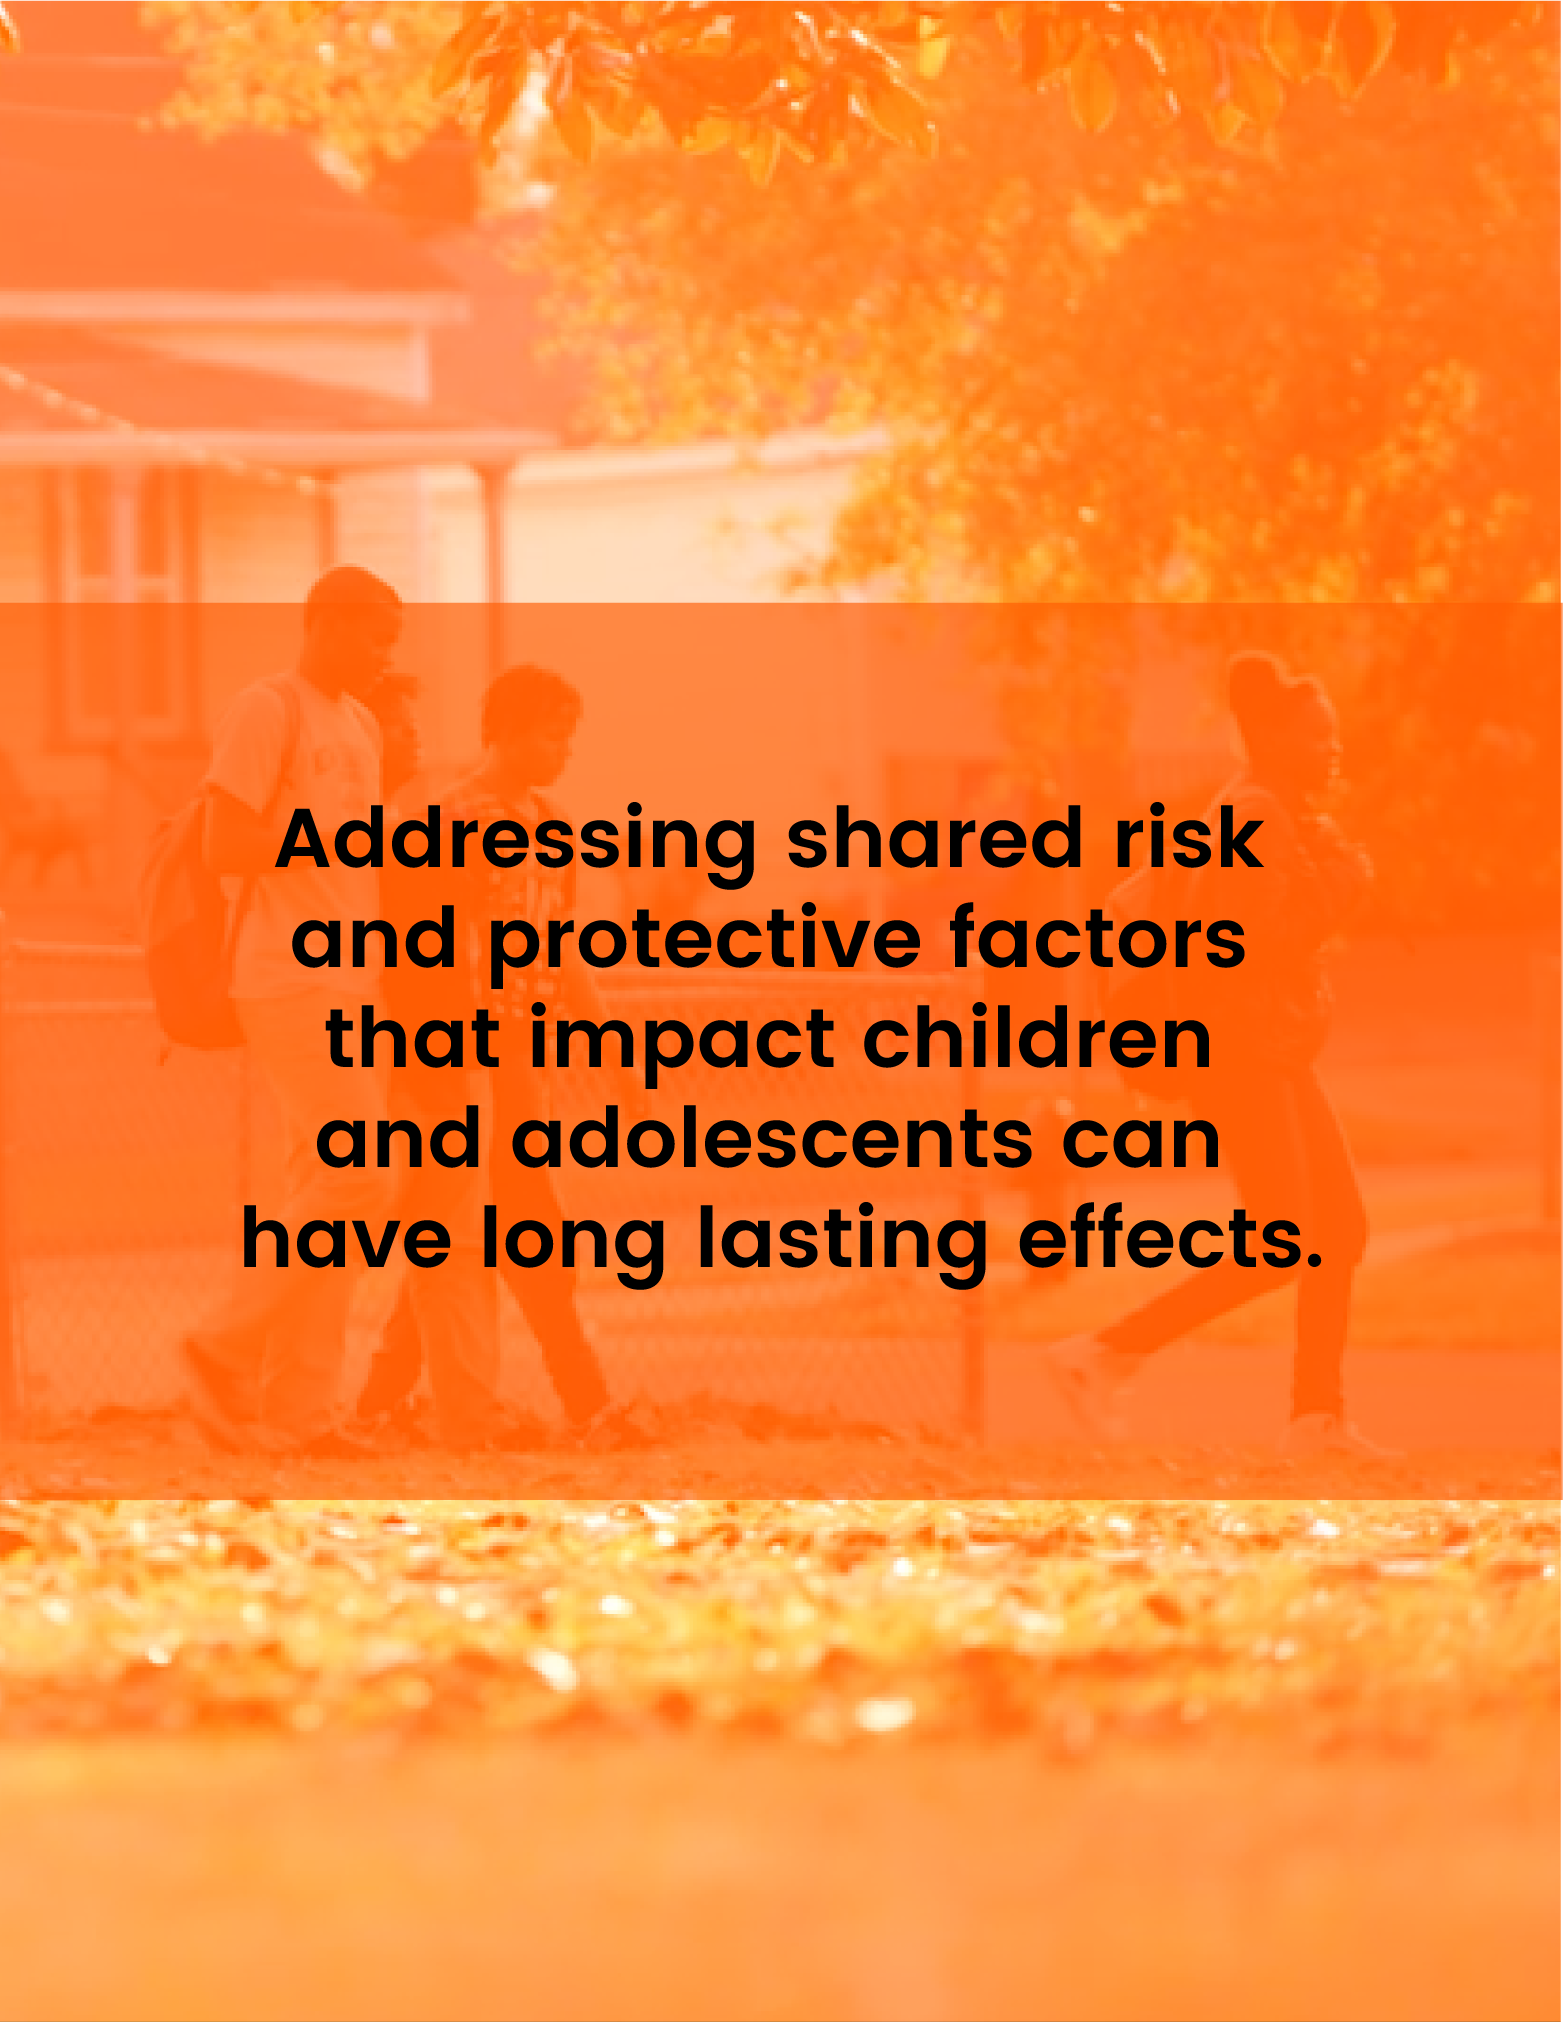 Addressing shared risk and protective factors that impact children and adolescents can have long lasting effects